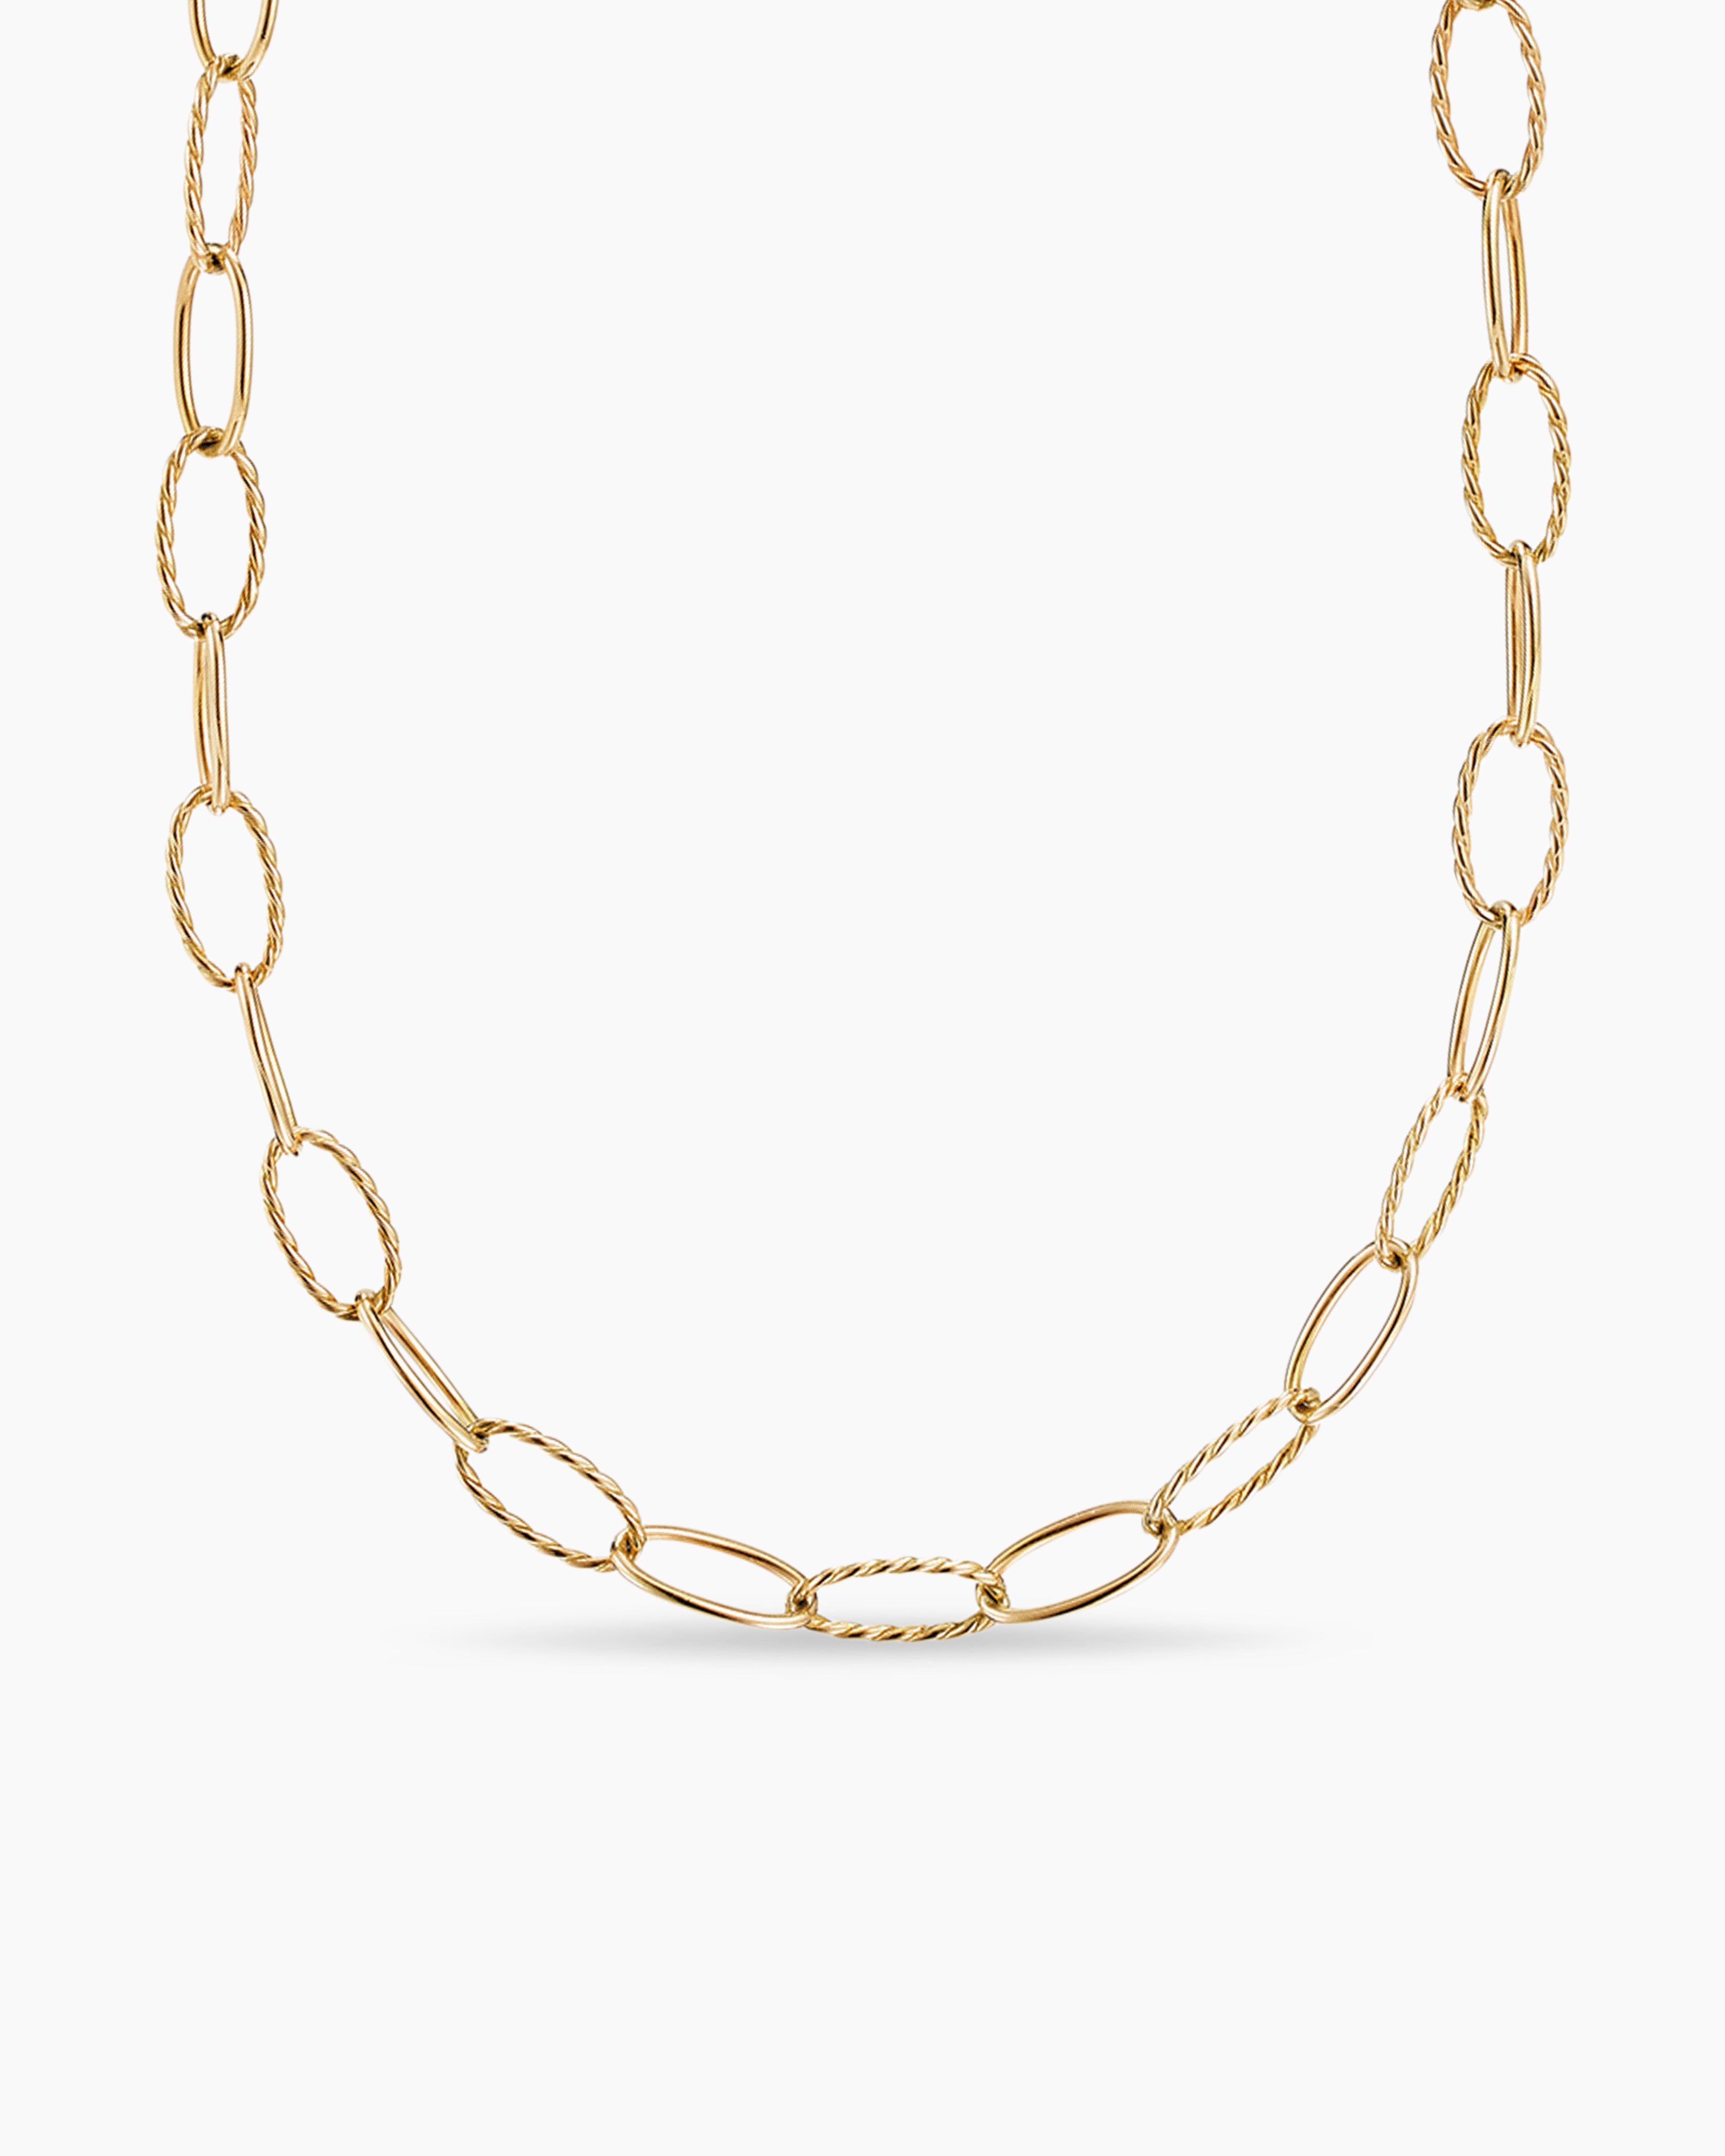 The Top 10 Necklace Link Types - Monty's